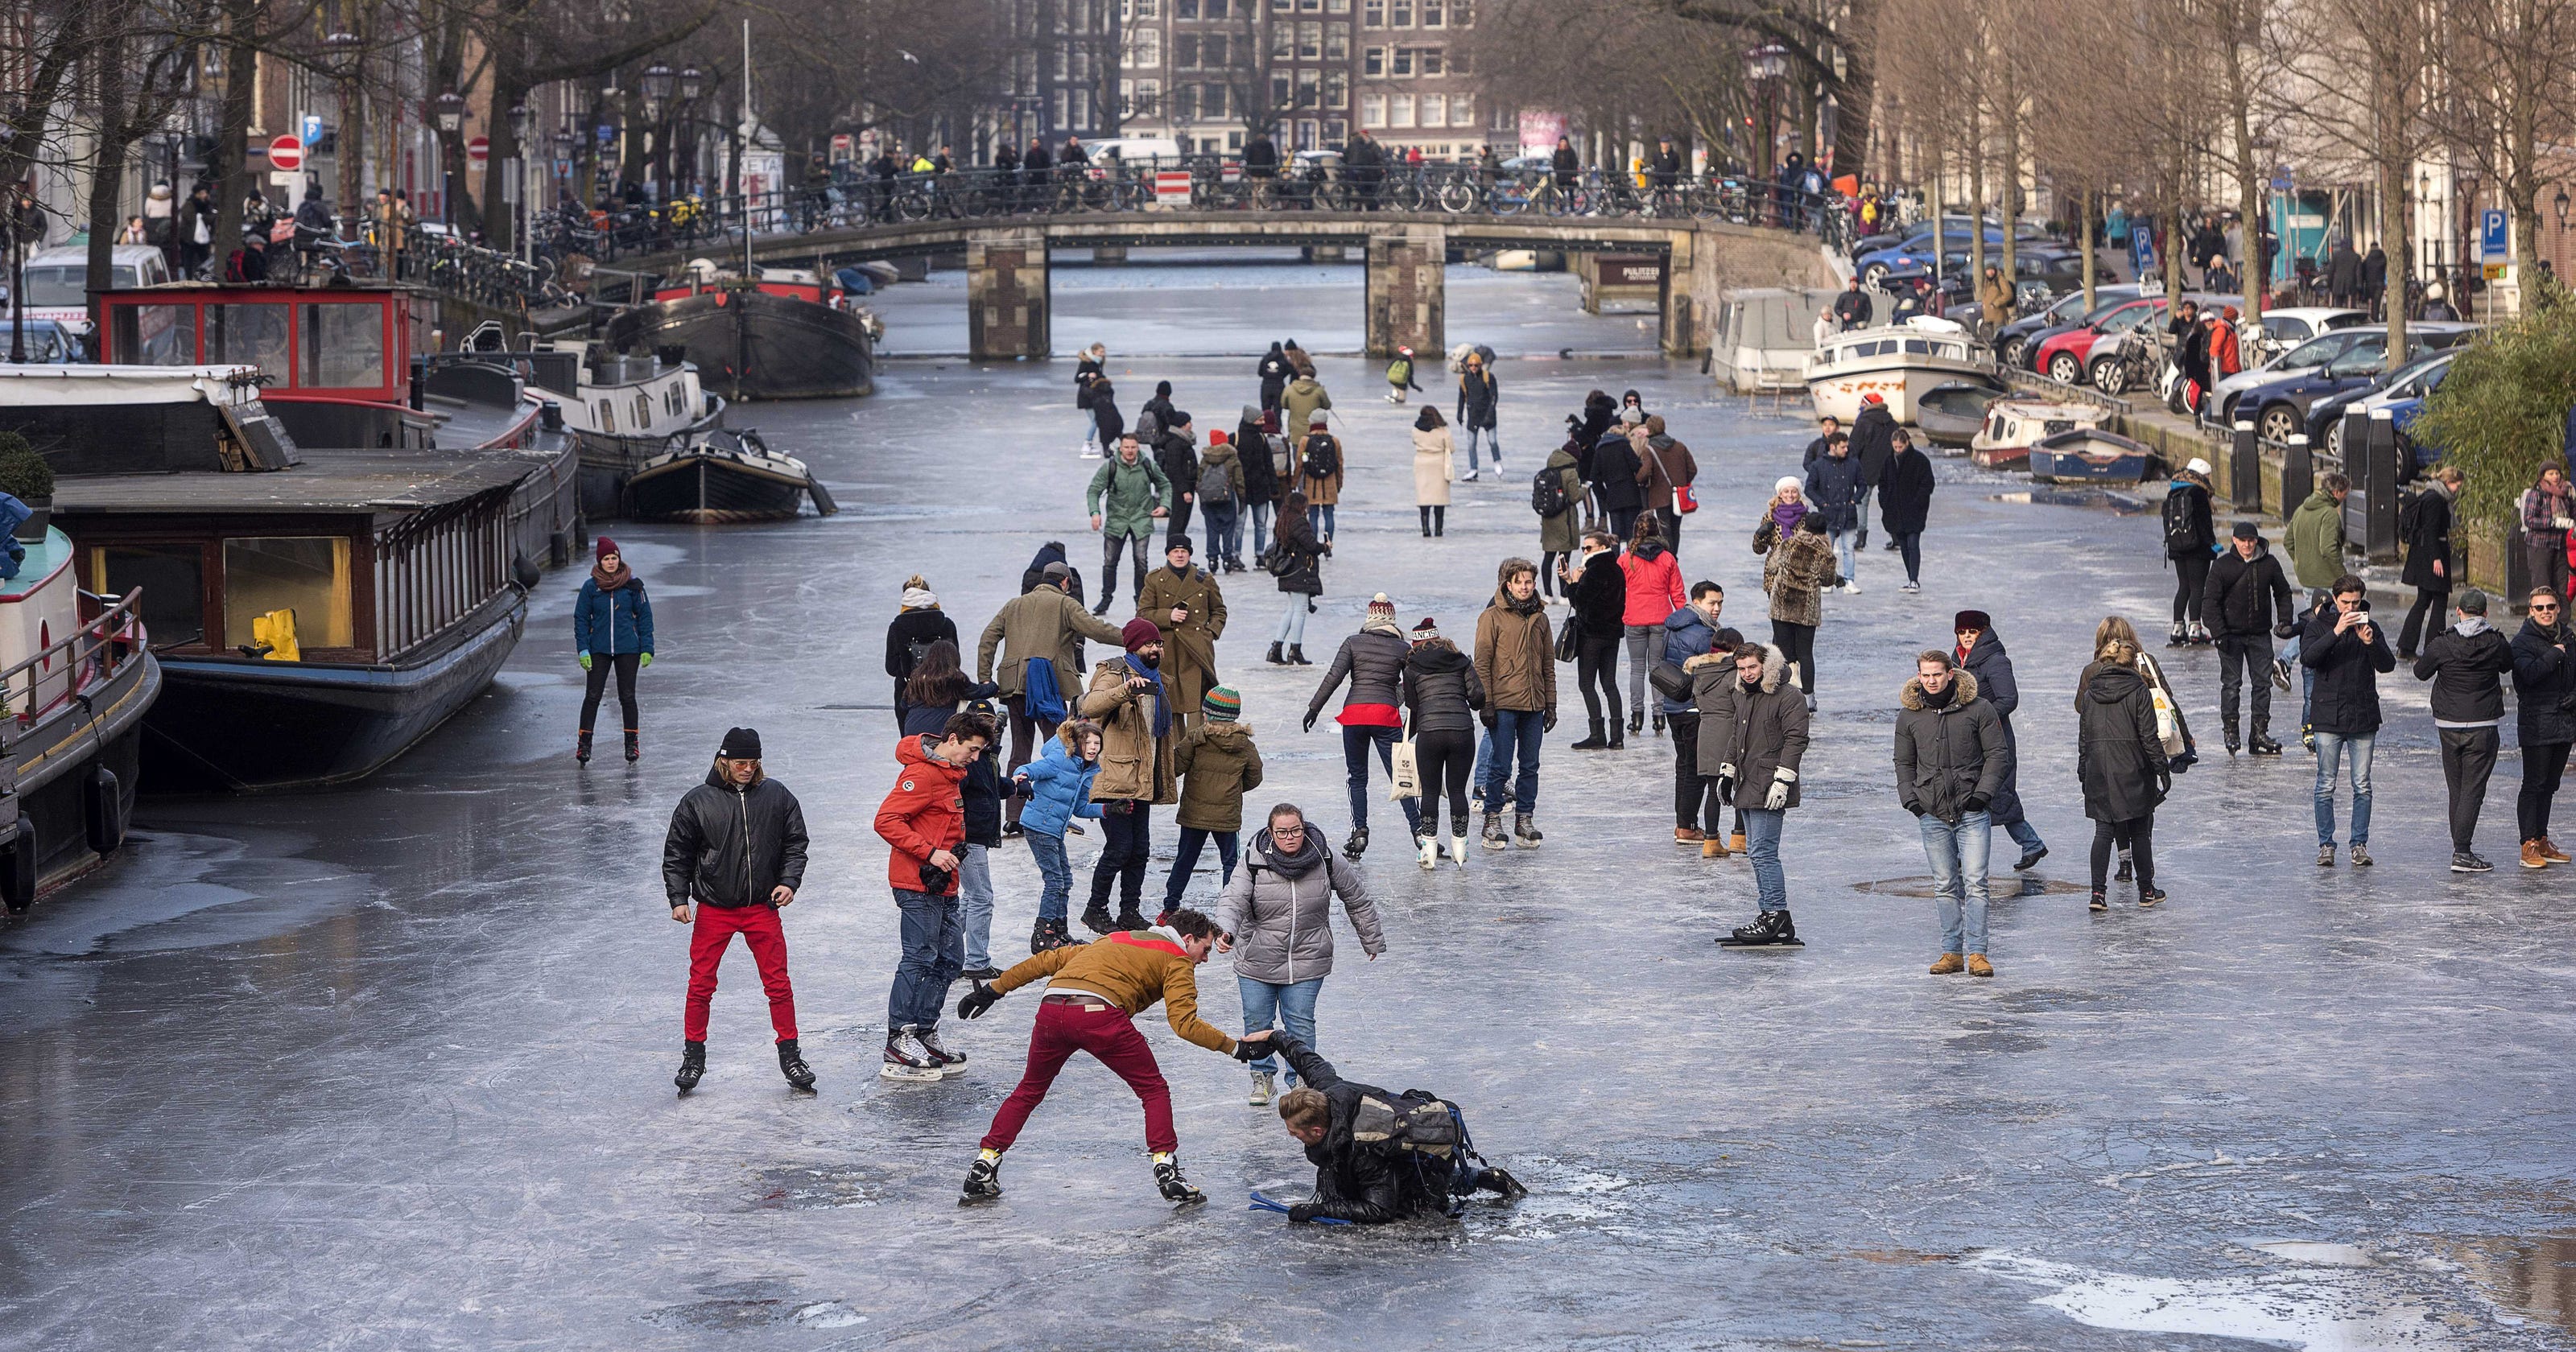 Europe weather: Amsterdam's canals freeze over; ice skaters flock holland weather in may